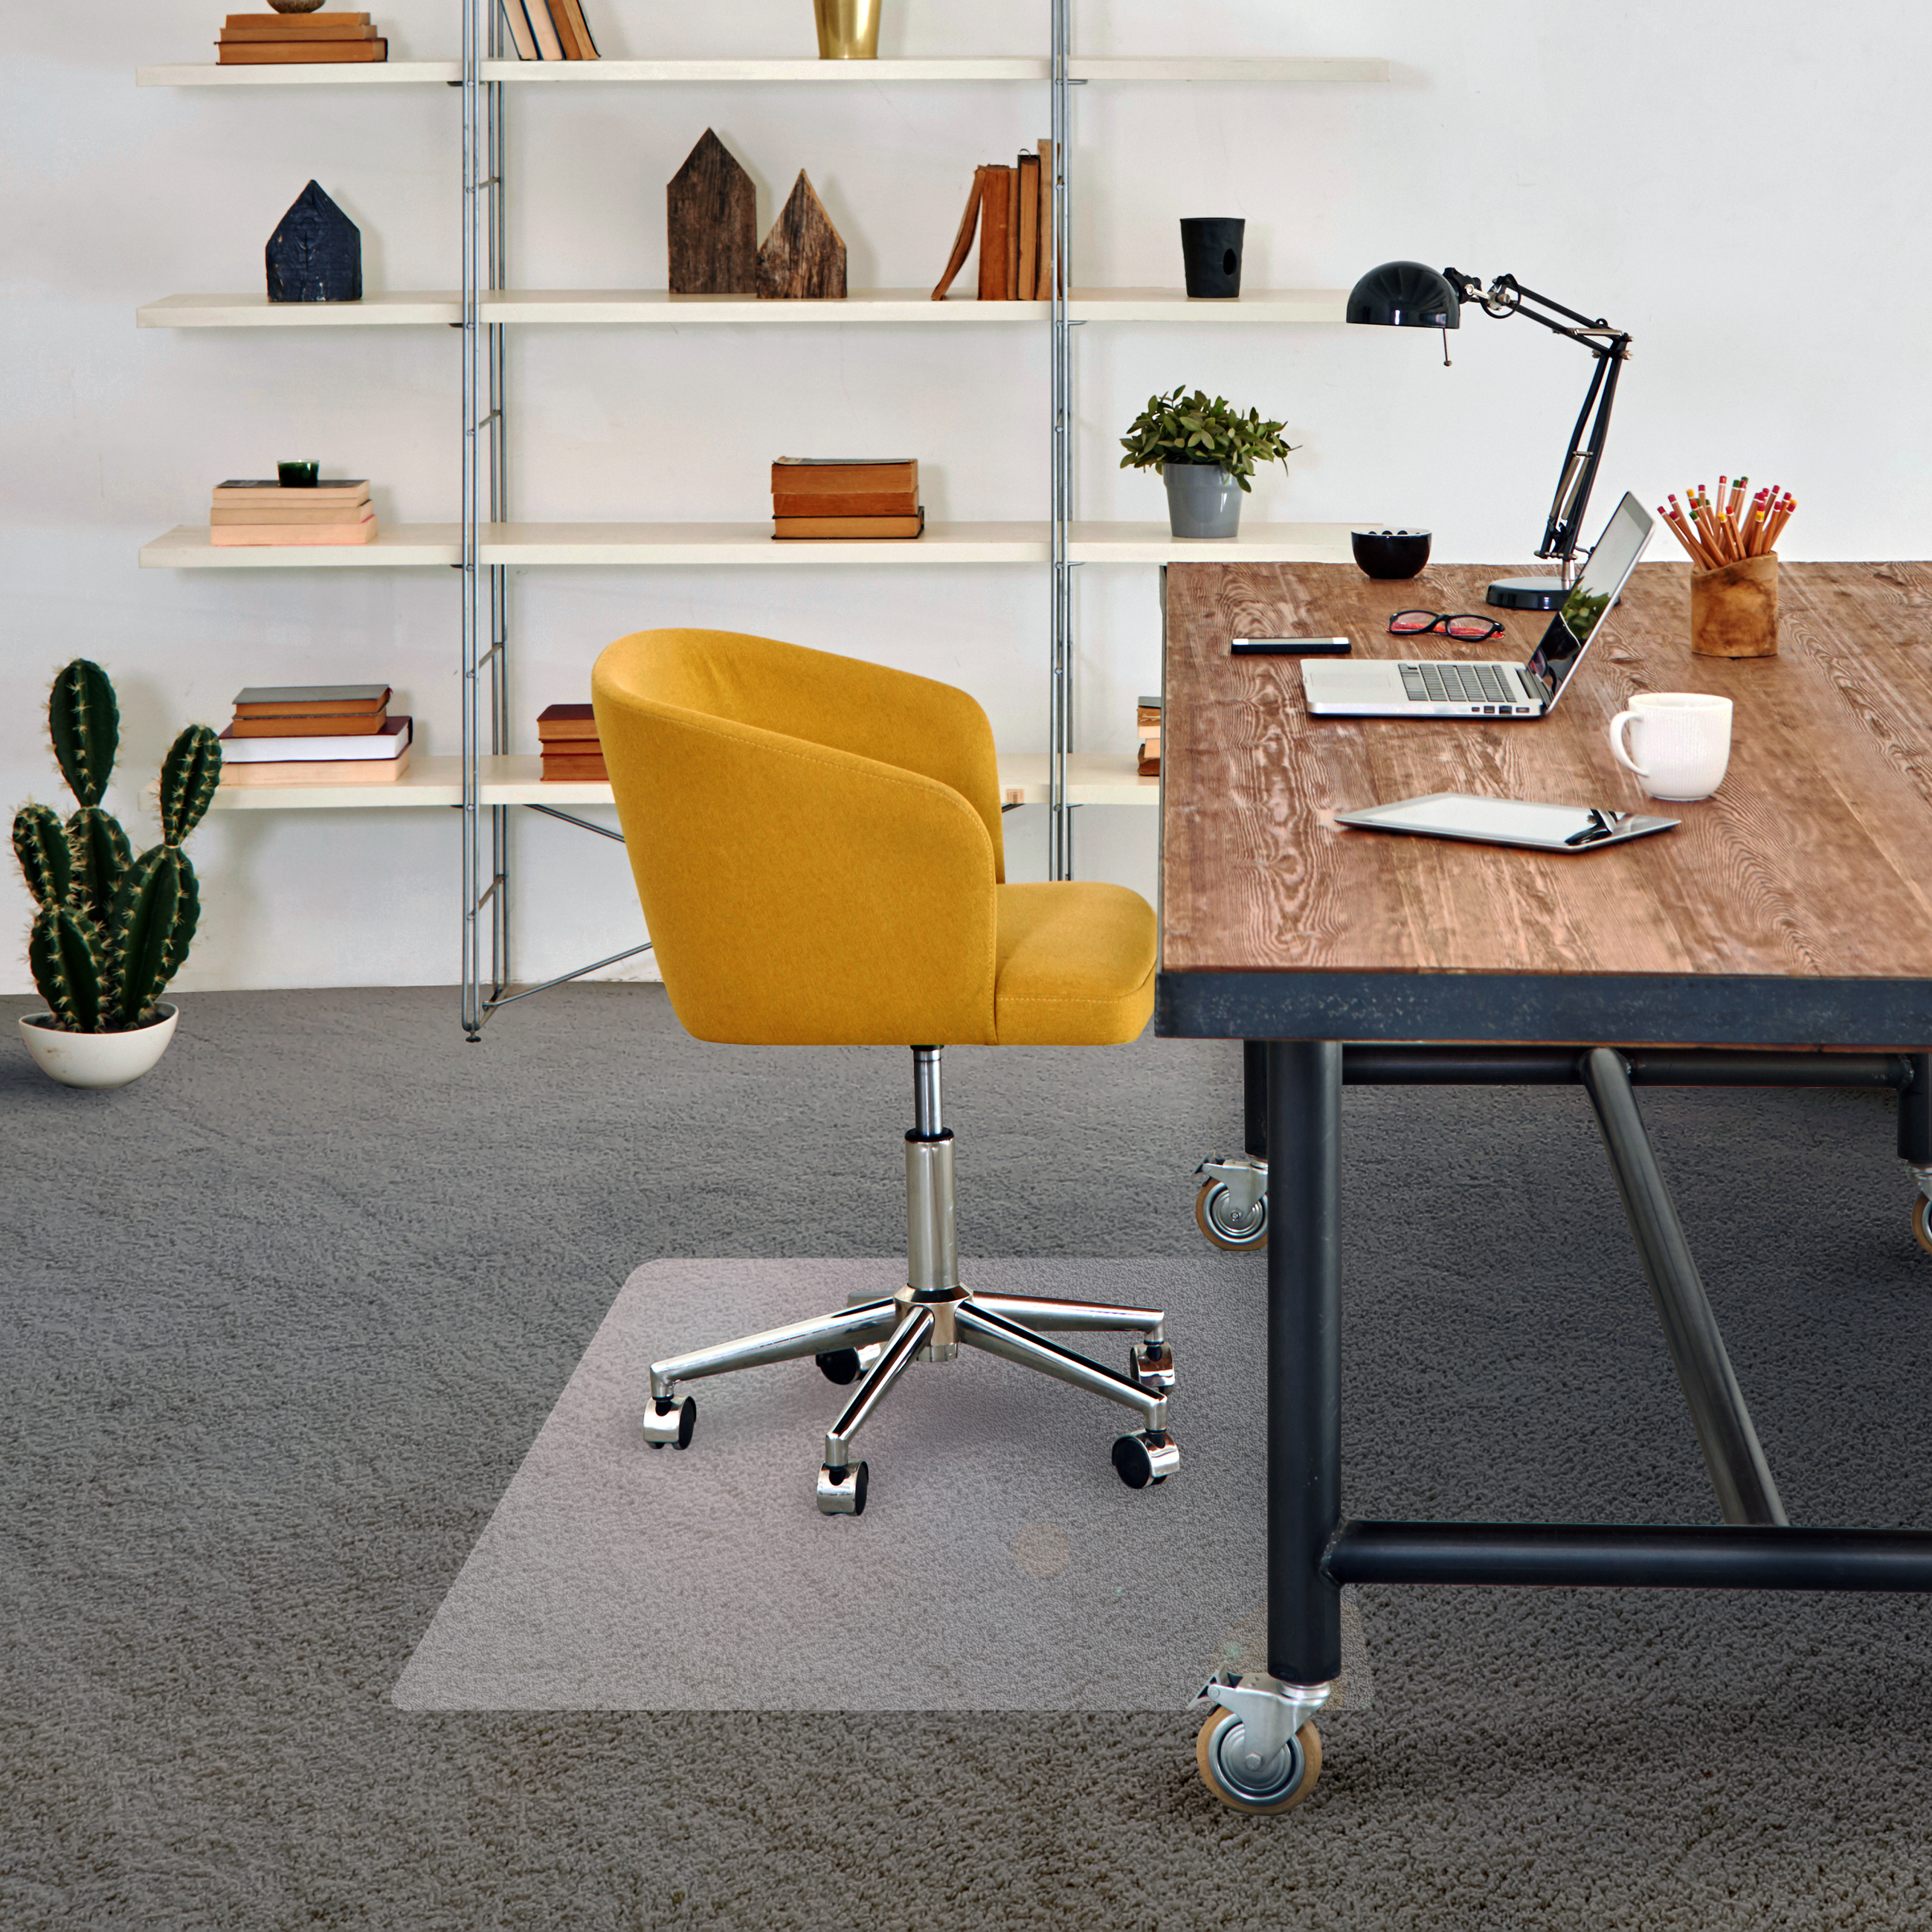 Best Rug For Office Chair - The Best Chair Mat For Carpeted Floors